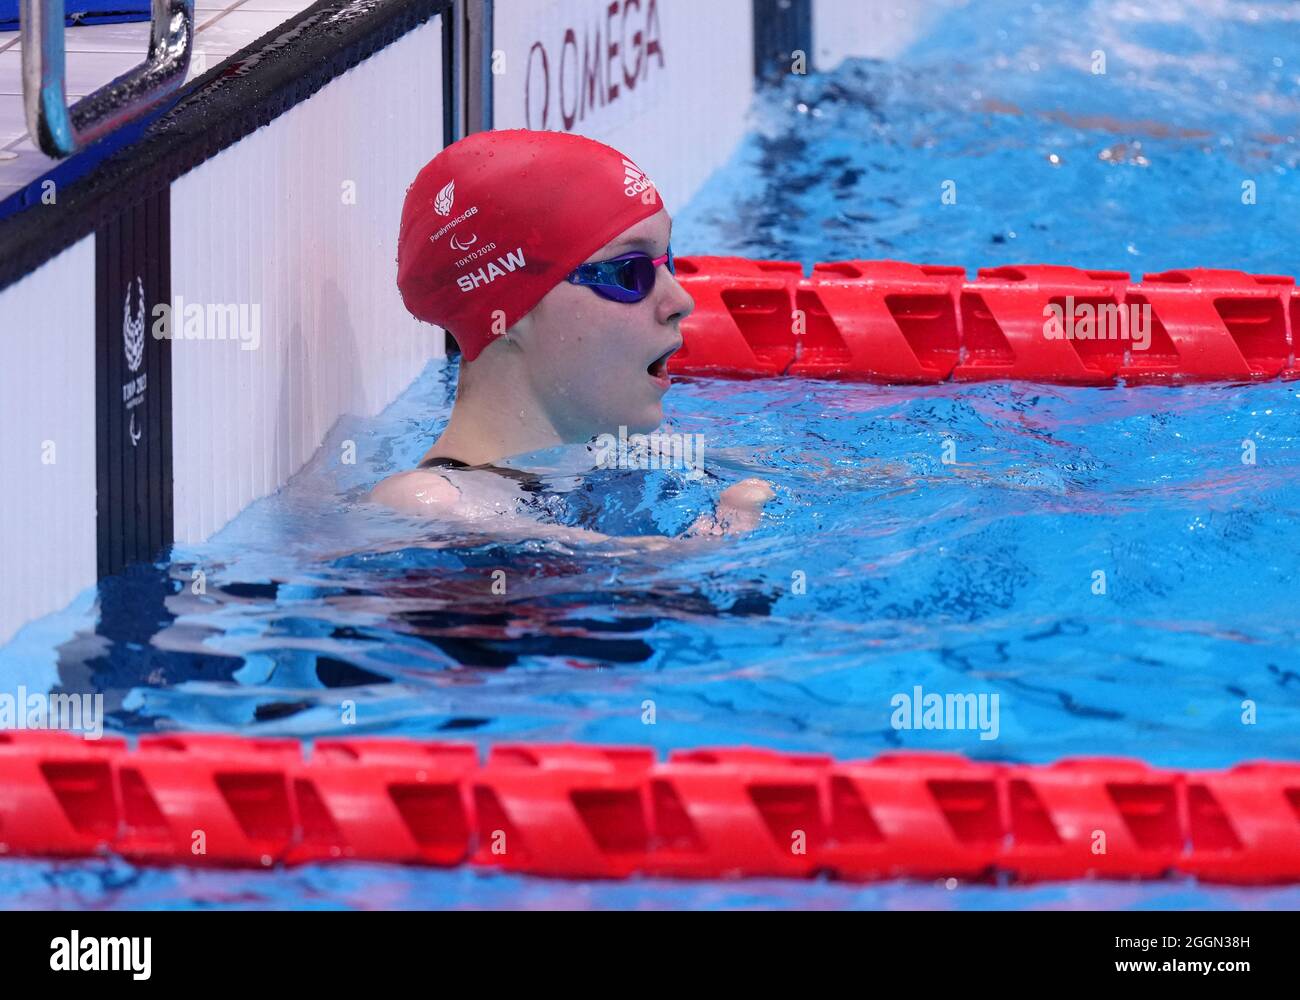 Great Britain's Toni Shaw after finishing fourth in the Women's 100m Butterfly - S9 Final at the Tokyo Aquatics Centre during day nine of the Tokyo 2020 Paralympic Games in Japan. Picture date: Thursday September 2, 2021. Stock Photo